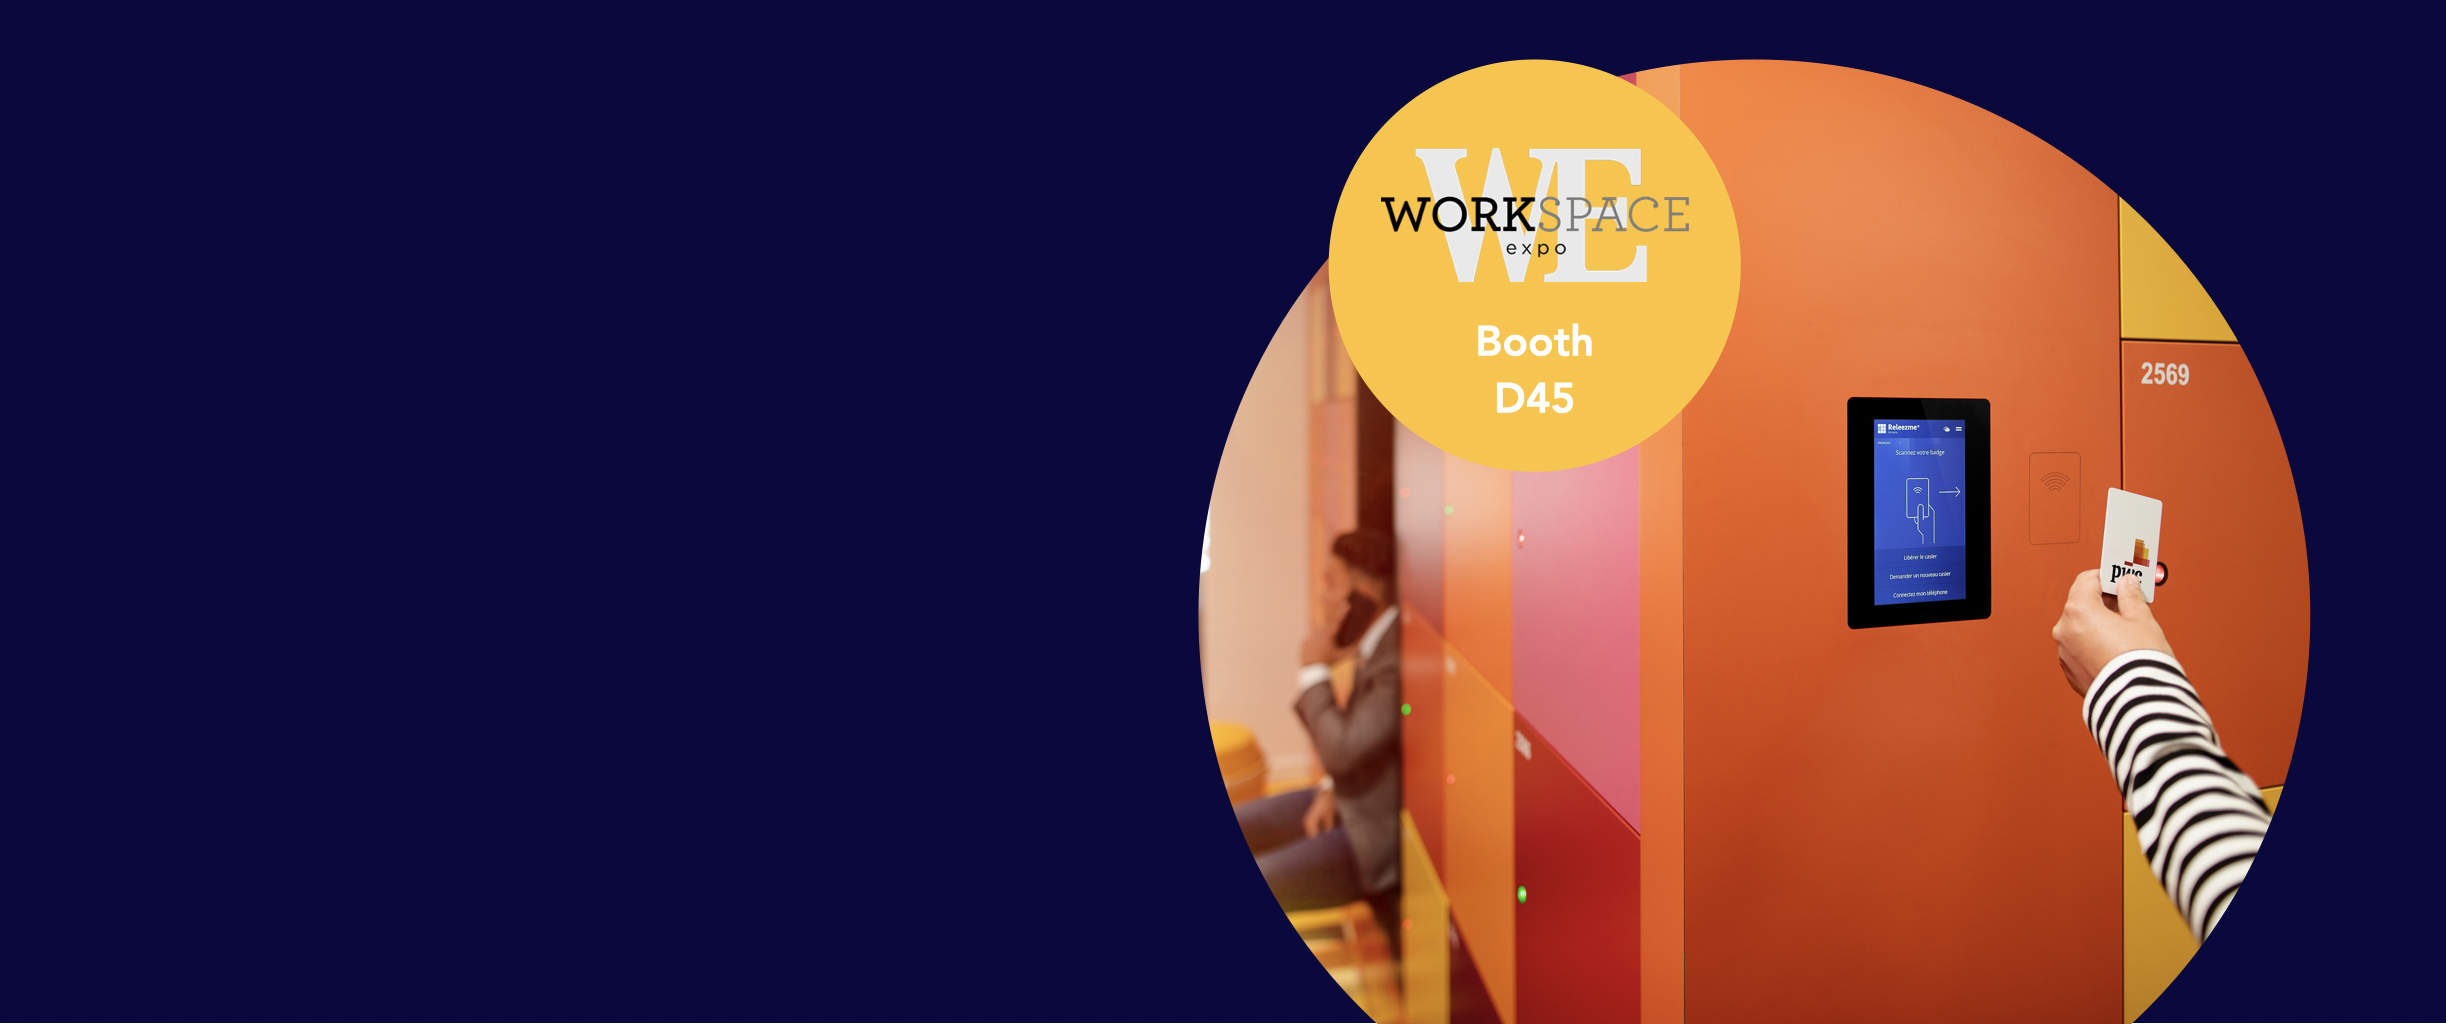 Meet Vecos at Workspace Expo